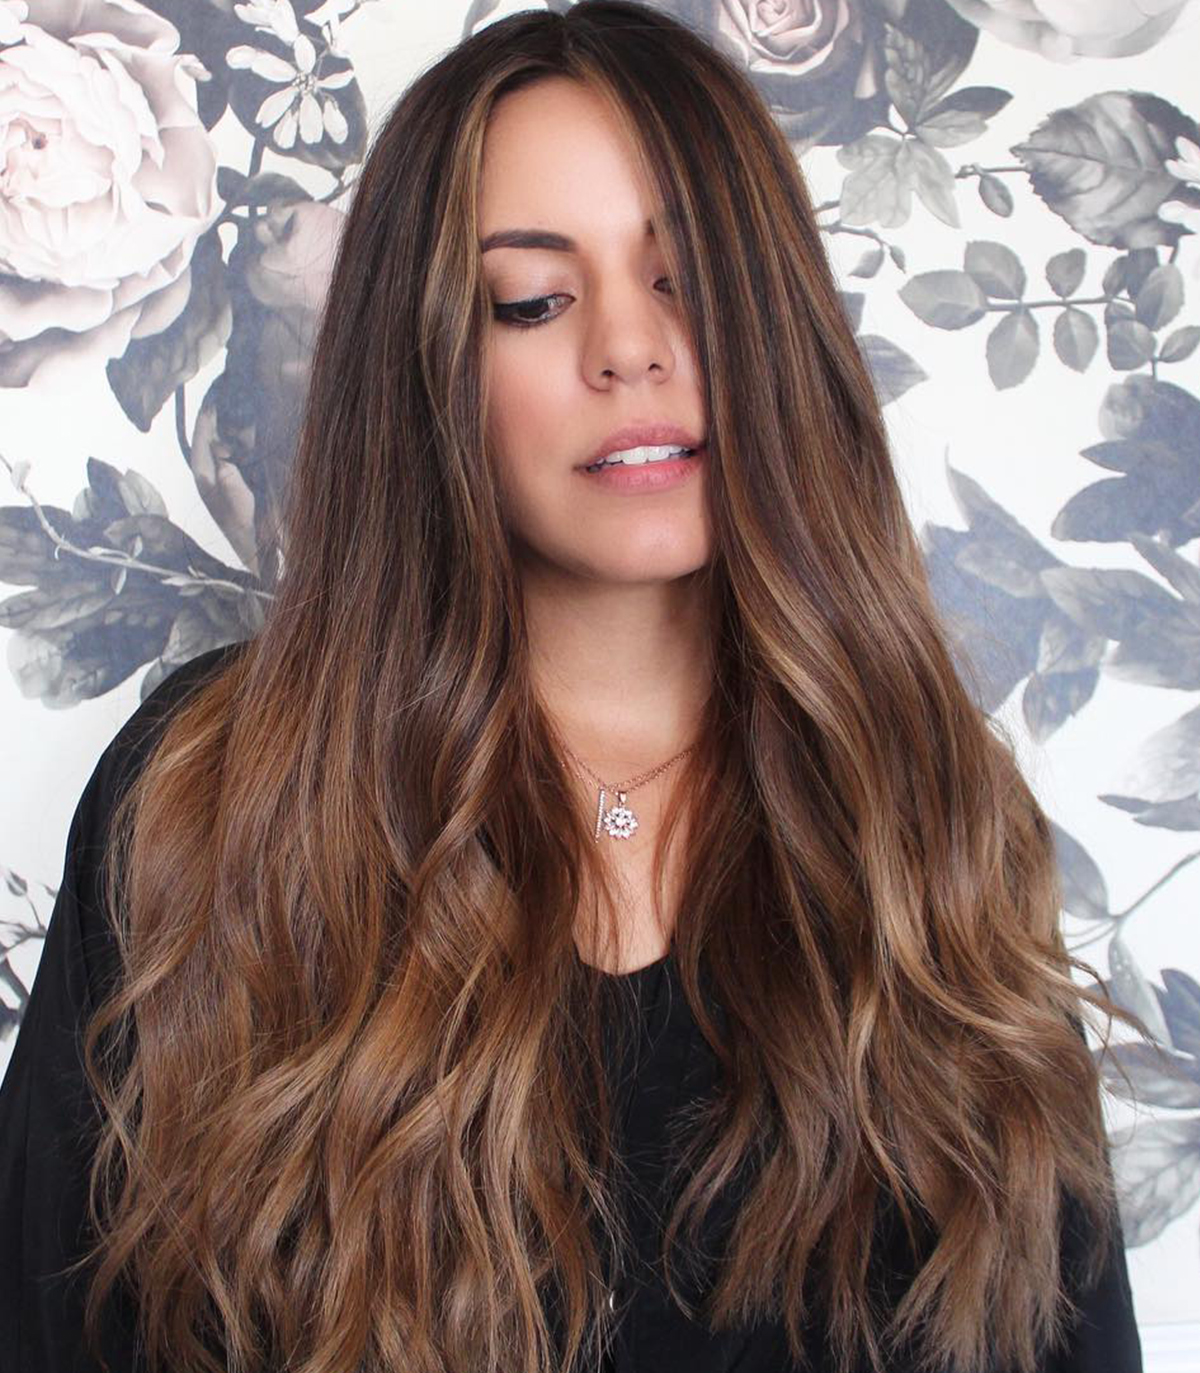 15 Dark Hair Color Ideas for Fall | Who What Wear